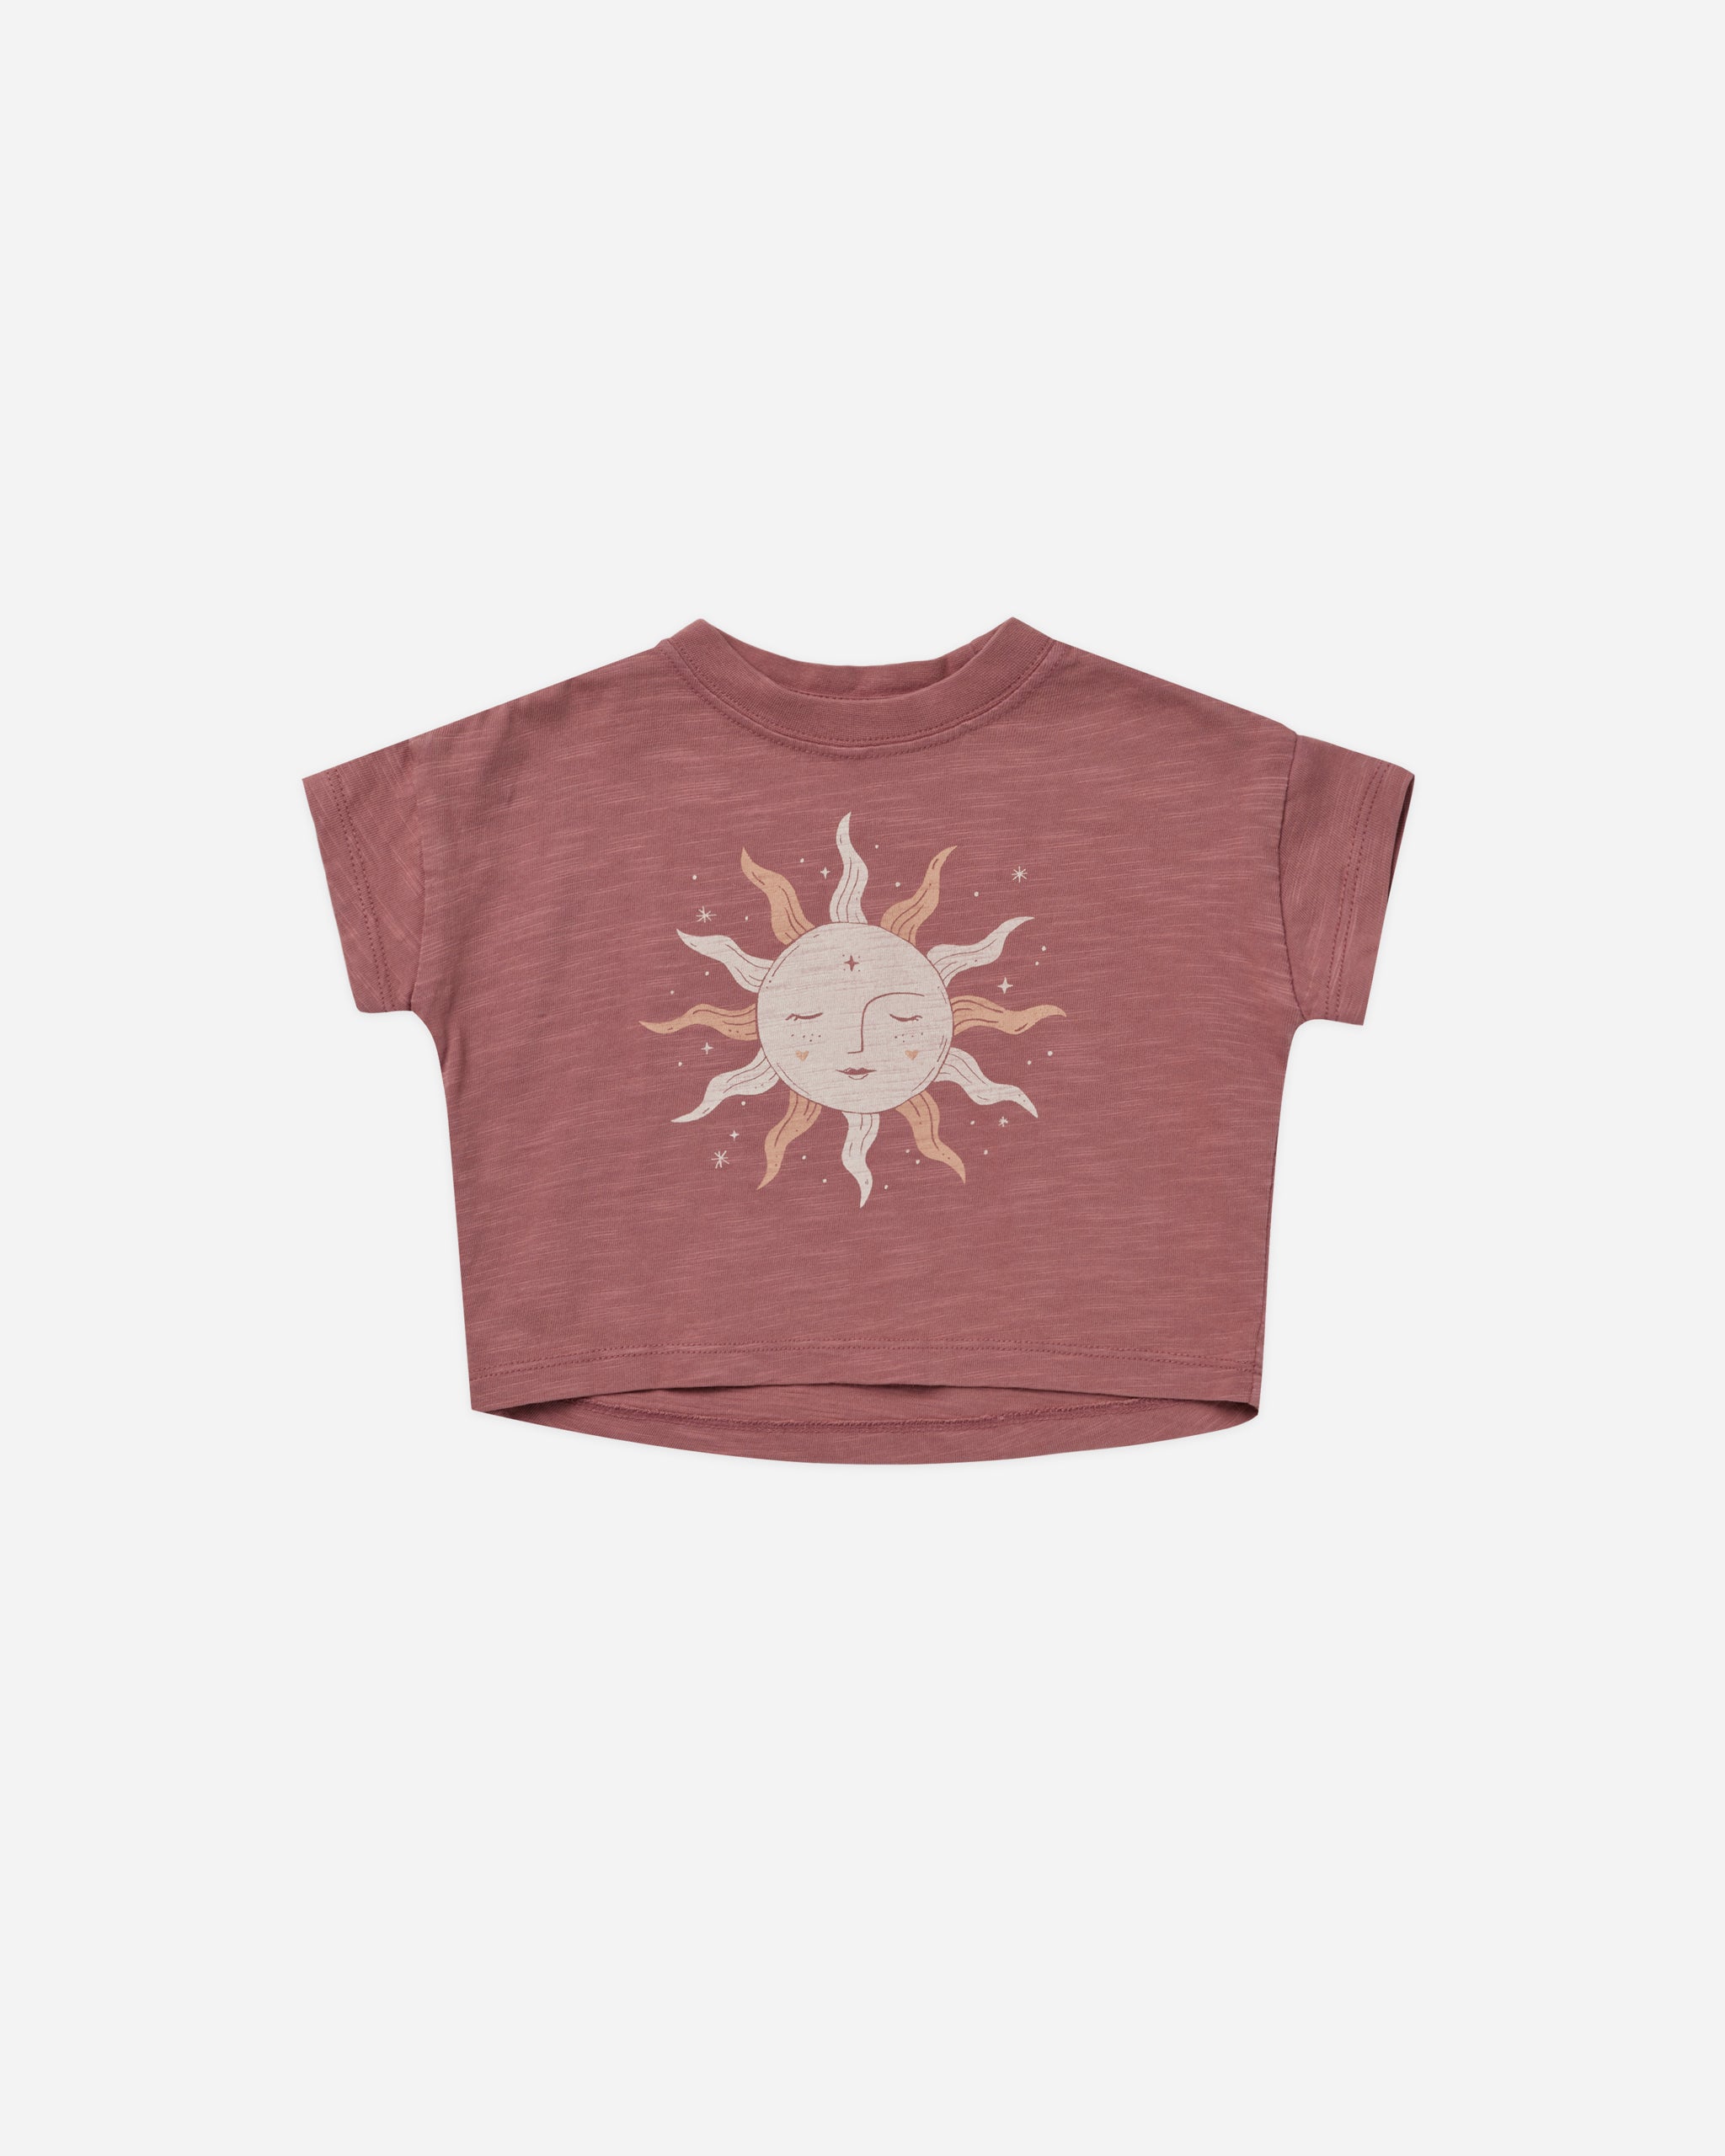 Boxy Tee || Sun - Rylee + Cru | Kids Clothes | Trendy Baby Clothes | Modern Infant Outfits |